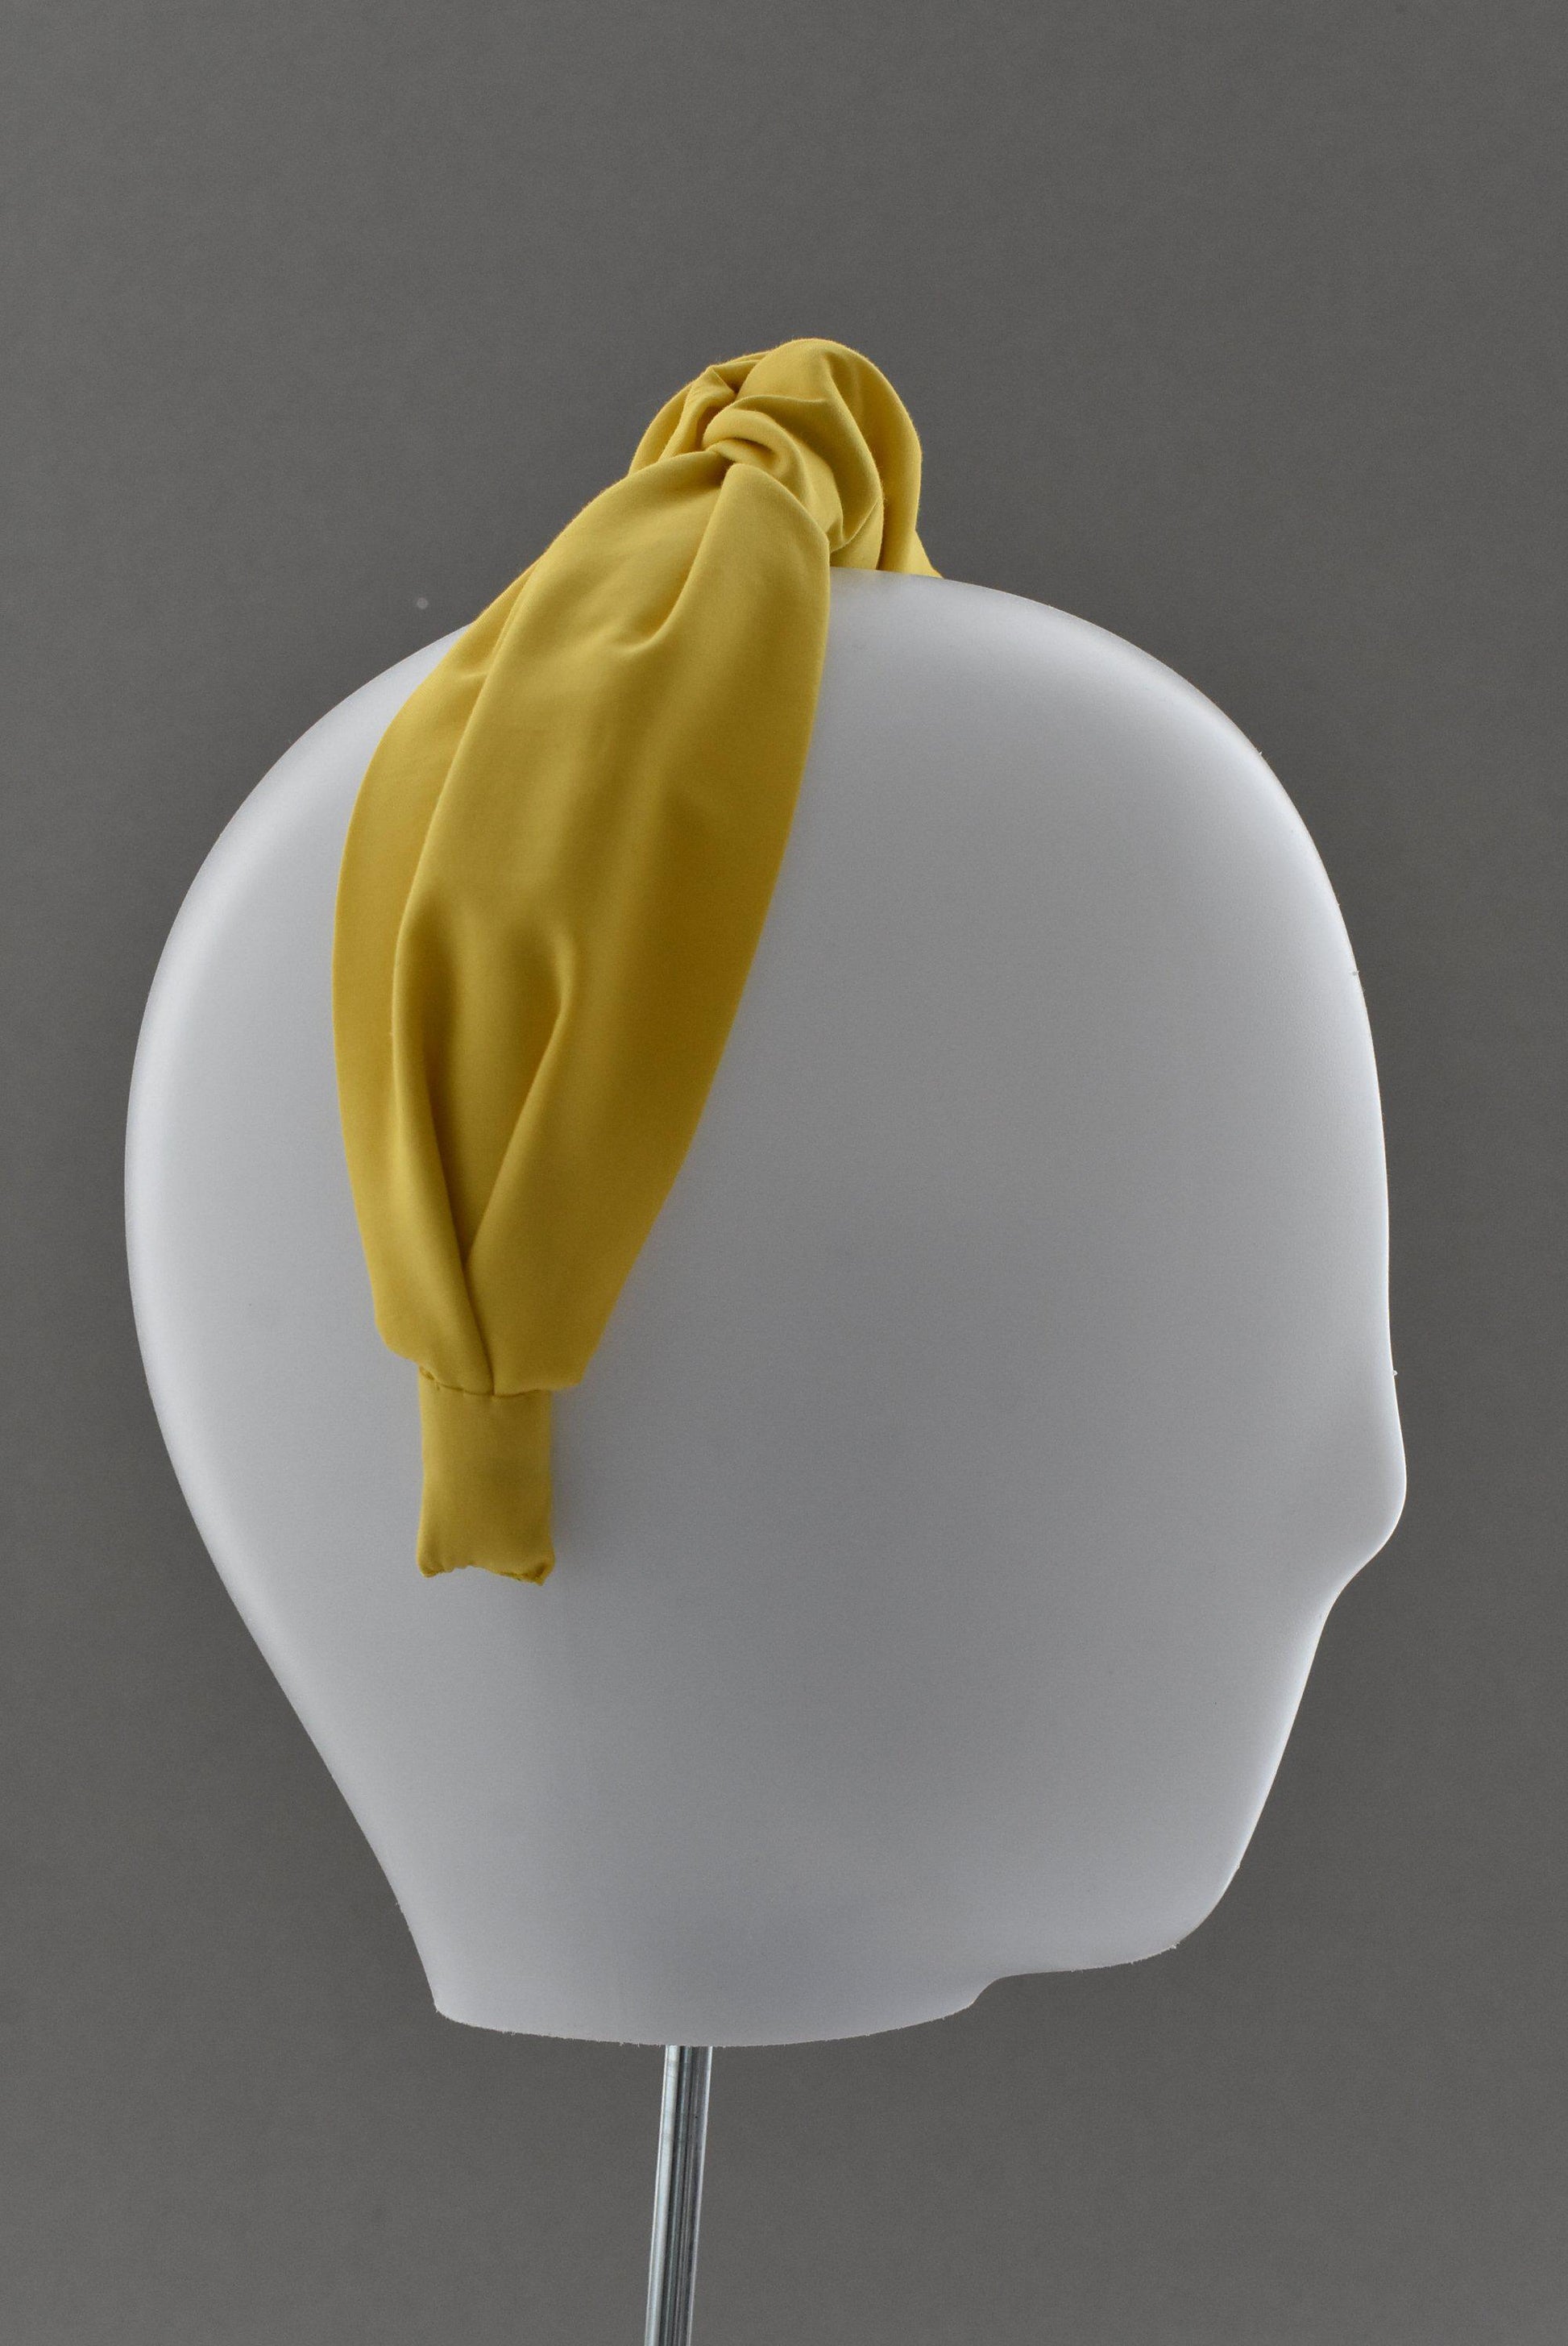 Ladies Tot Knot Alice band - Liberty of London Bright Yellow - Tot Knots of Brighton